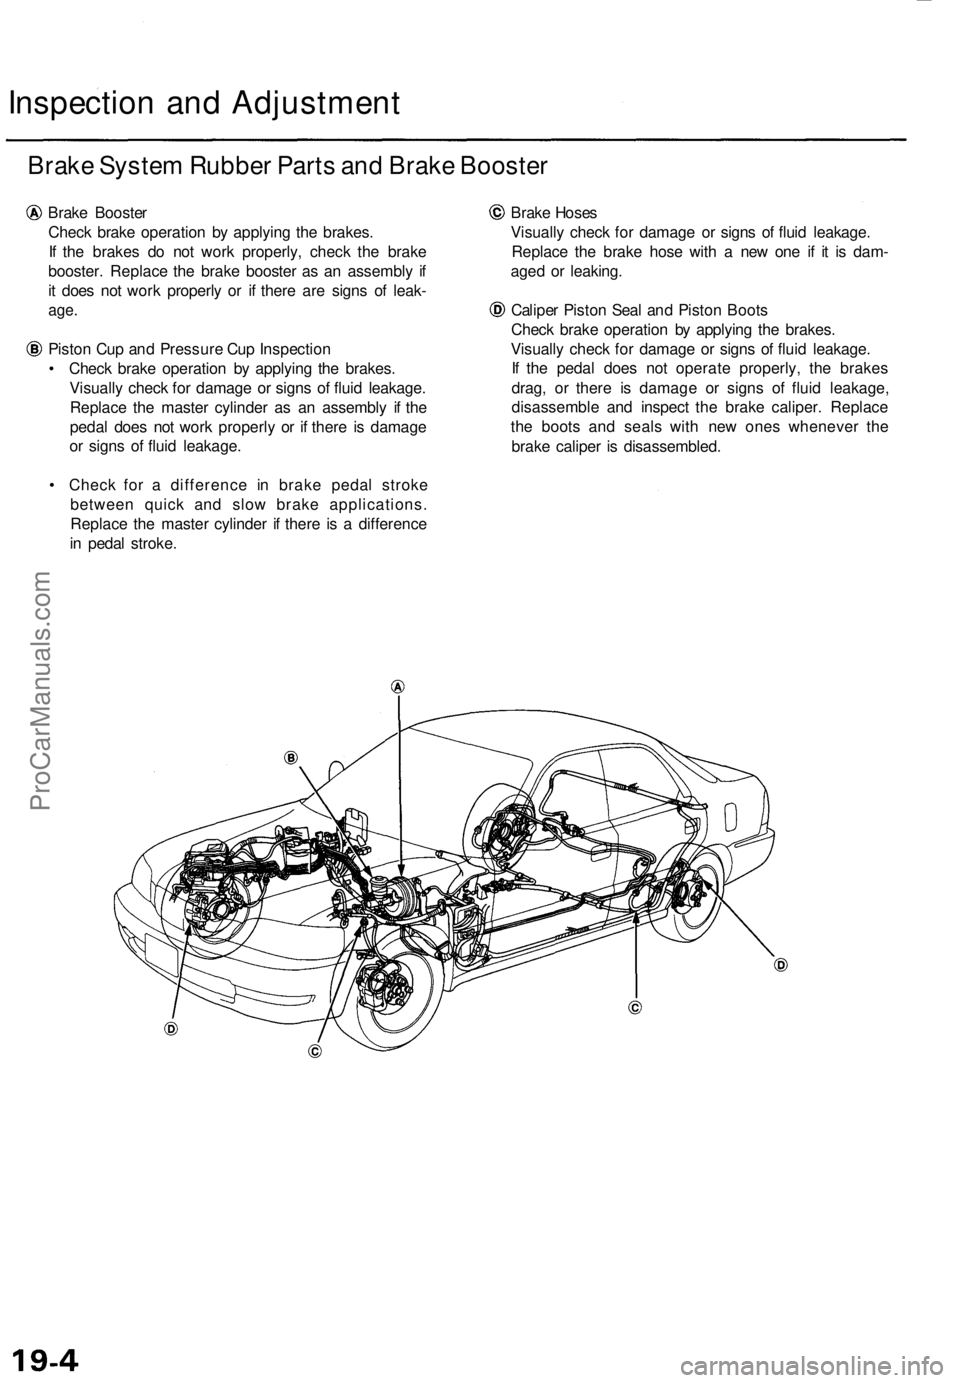 ACURA TL 1995  Service Repair Manual 
Inspection and Adjustment

Brake System Rubber Parts and Brake Booster

Brake Booster

Check brake operation by applying the brakes.

If the brakes do not work properly, check the brake

booster. Rep